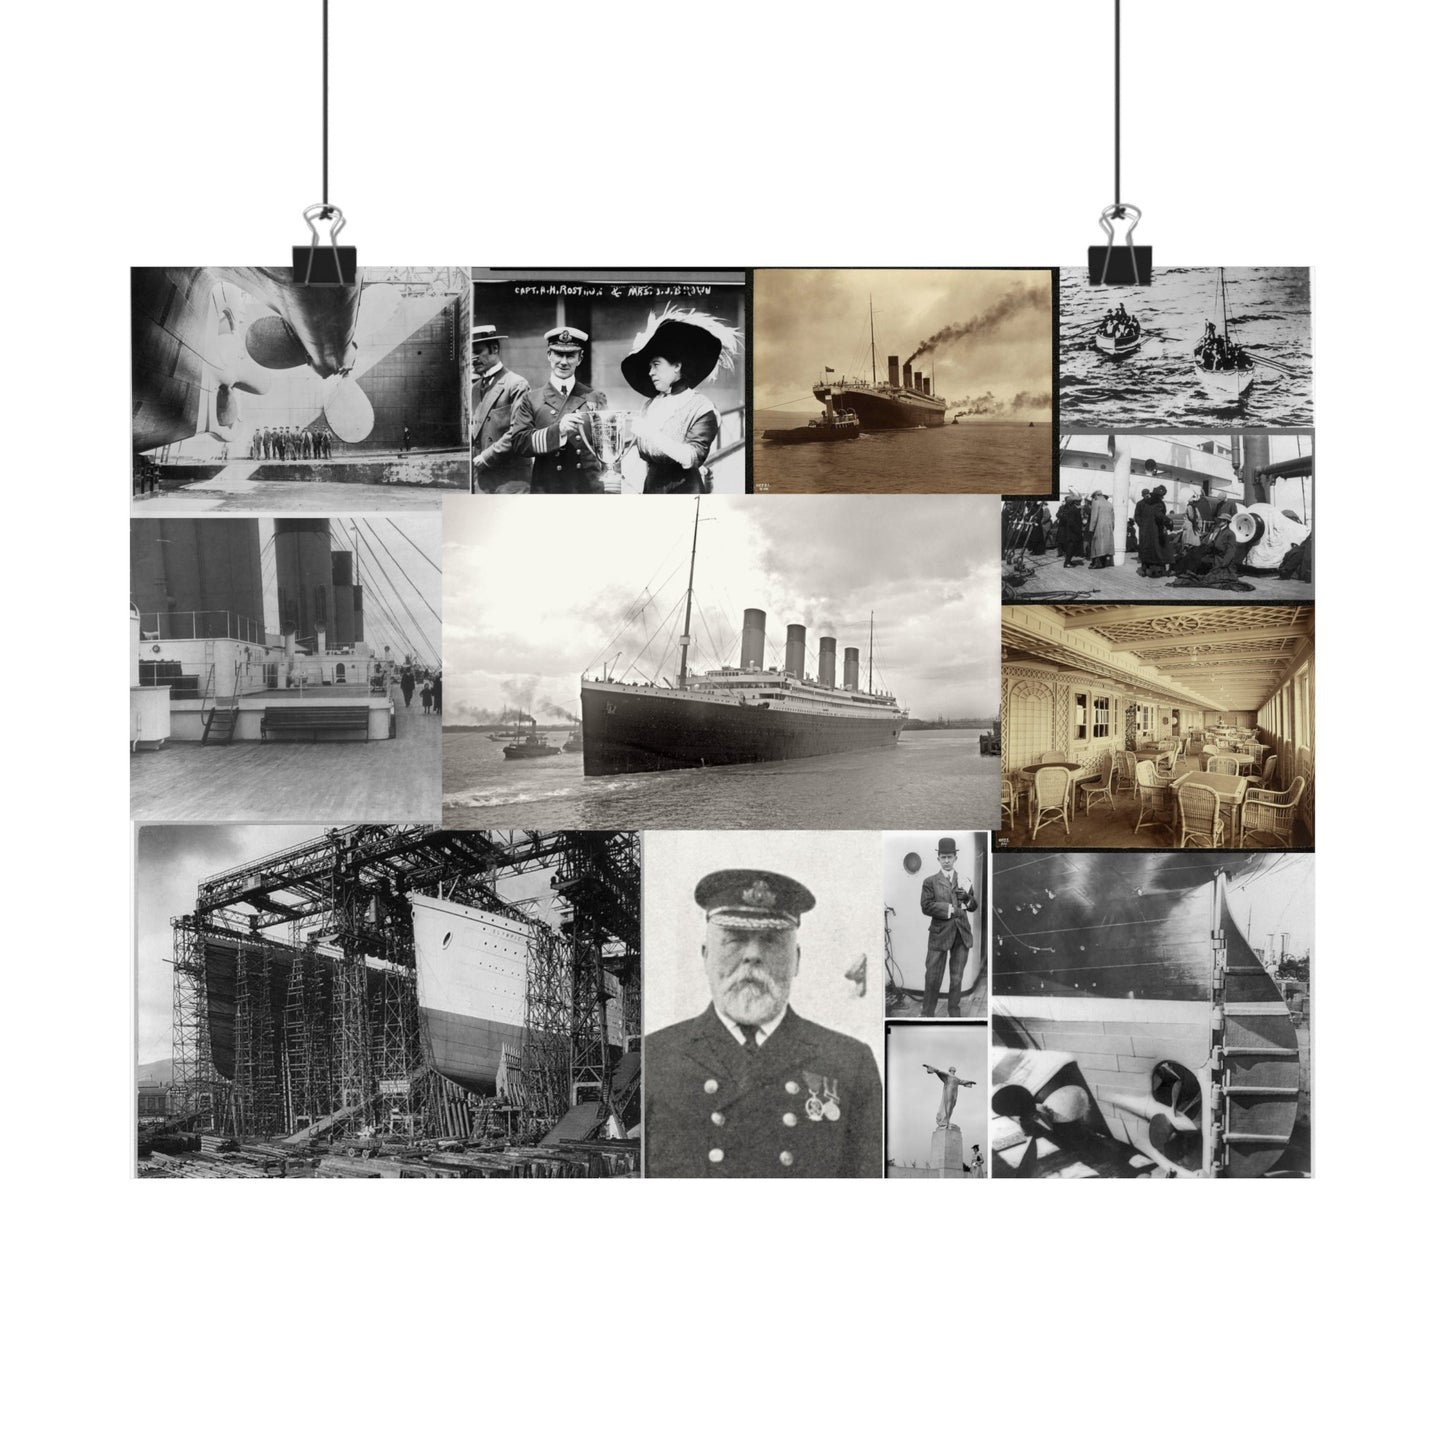 Titanic Posters, Matte Horizontal, Historical Photos, 11x9, 13x10, and 10x10 inches available, Giclée Print, Archival paper